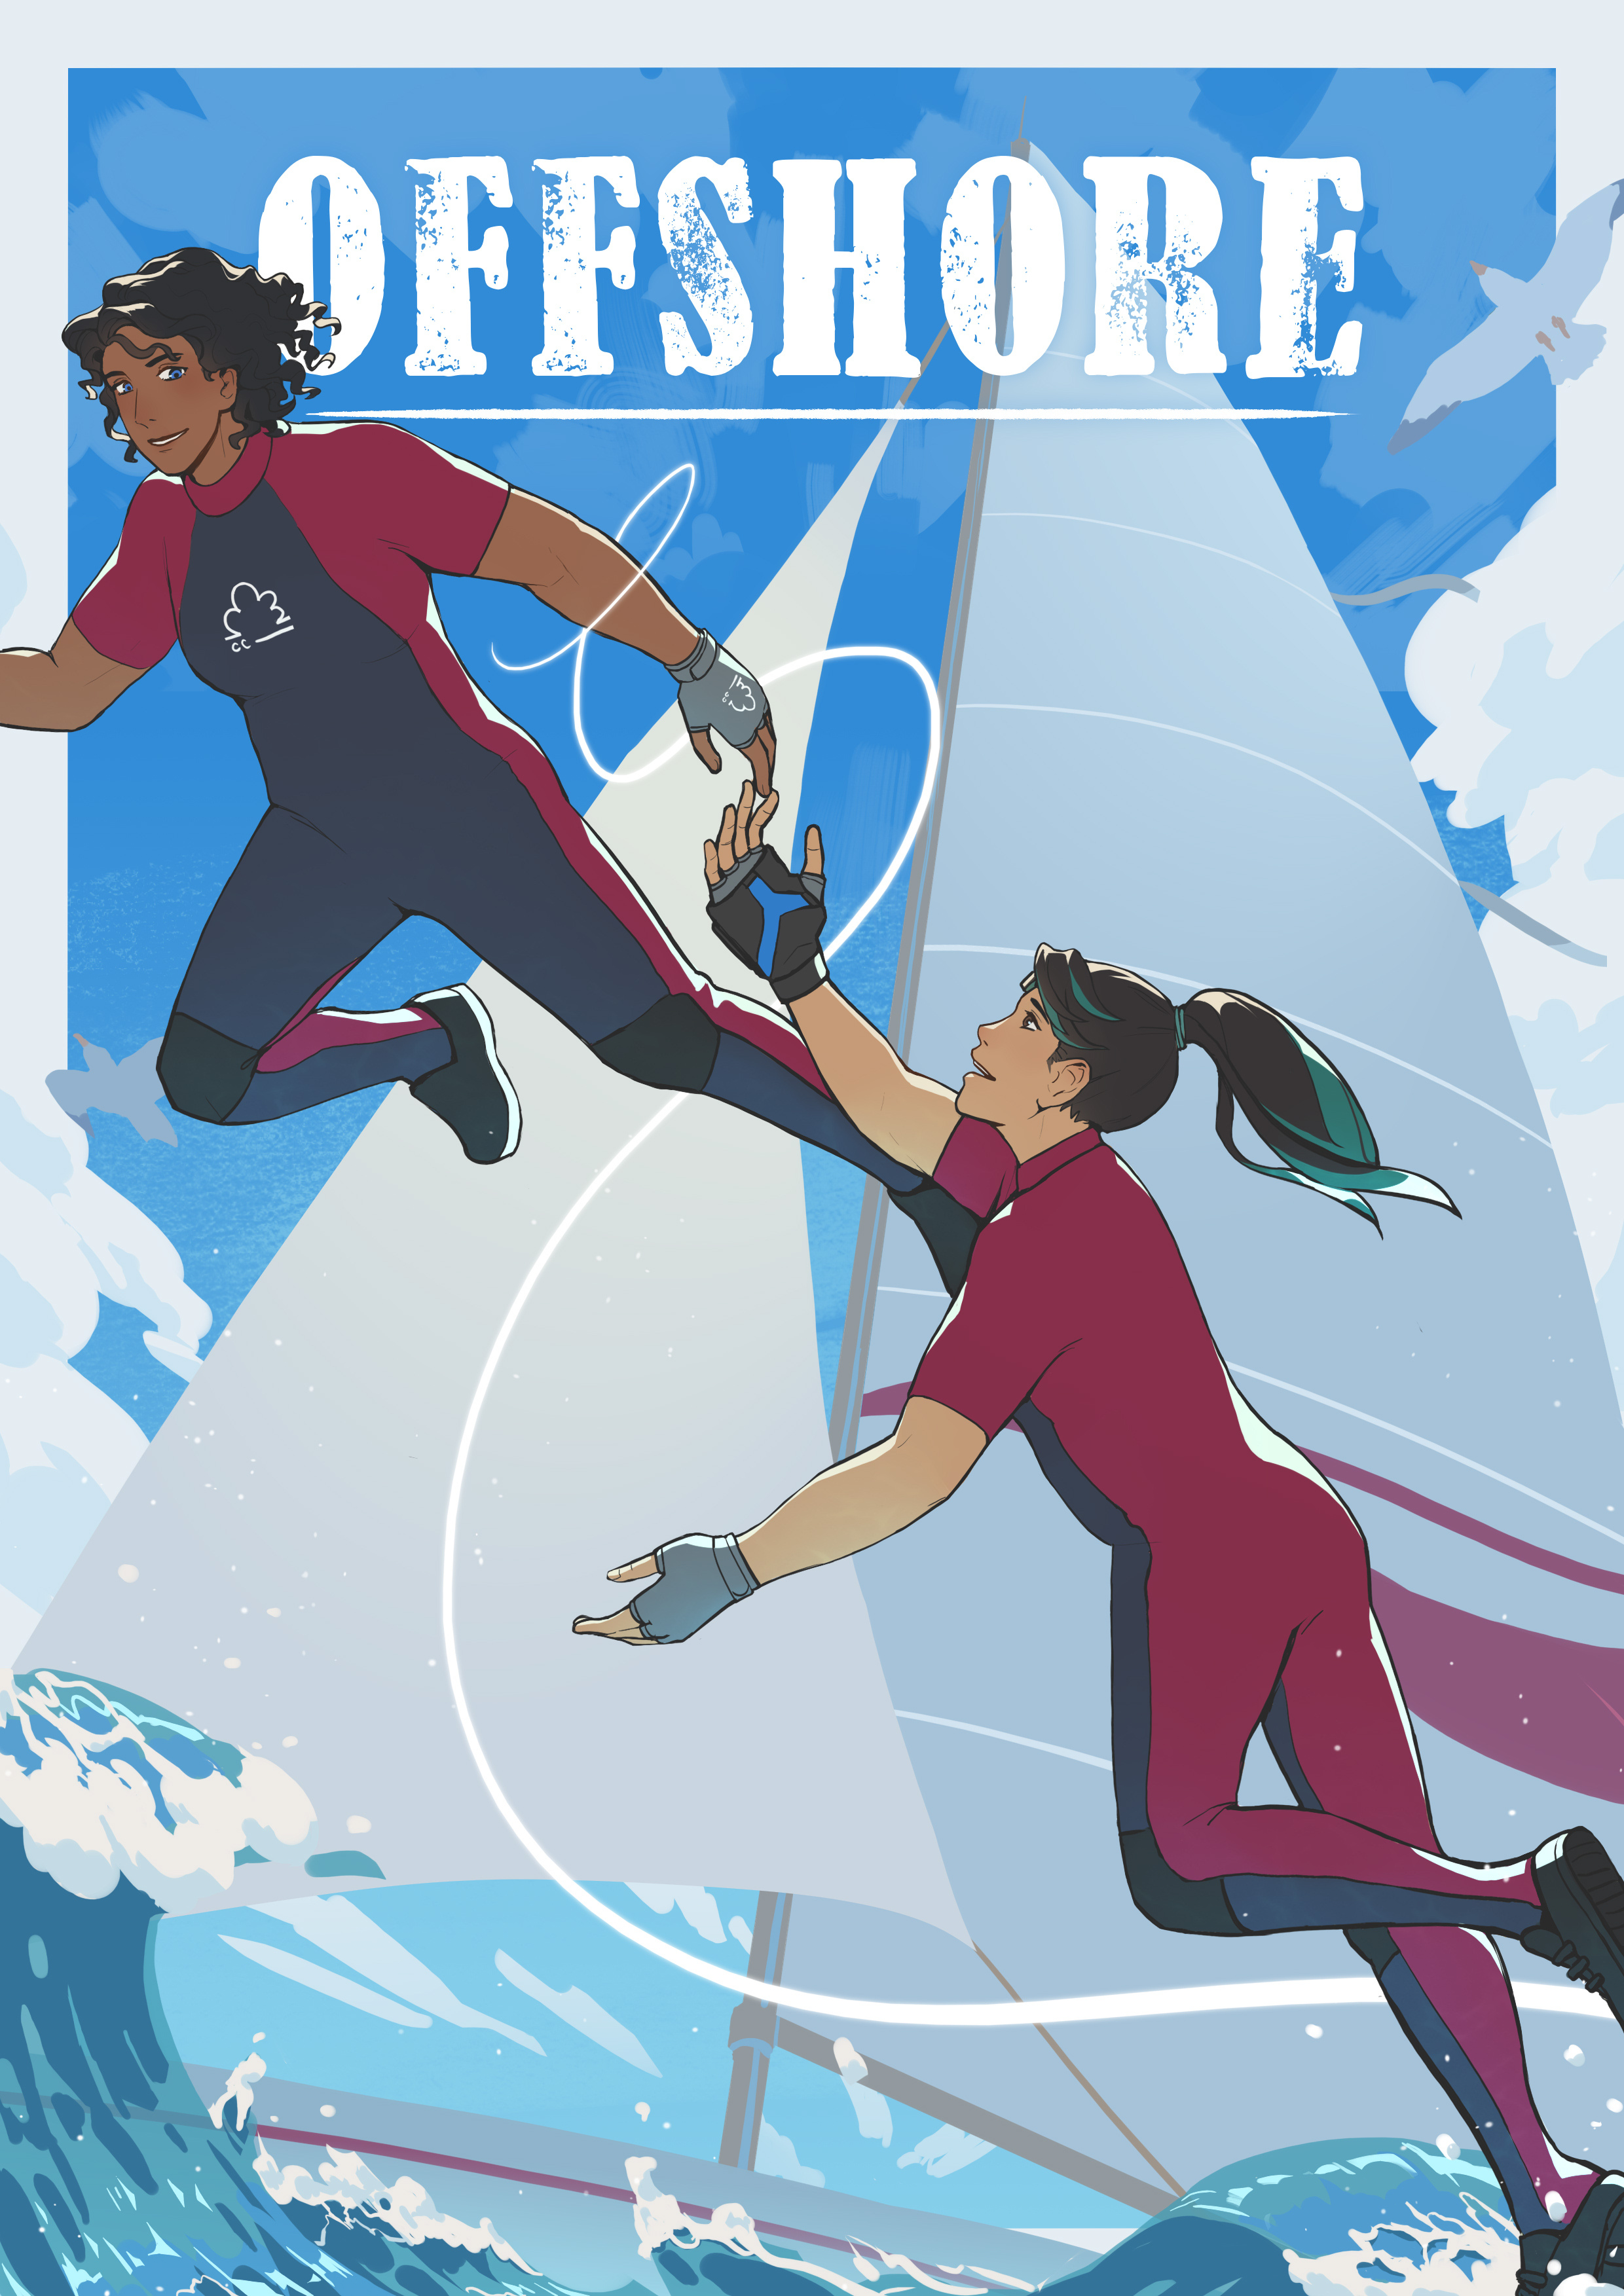 A cover image for Offshore, featuring two characters floating in the air towards the top left of the image, over ocean waves and seafoam. A race yacht's sail rises in the background.